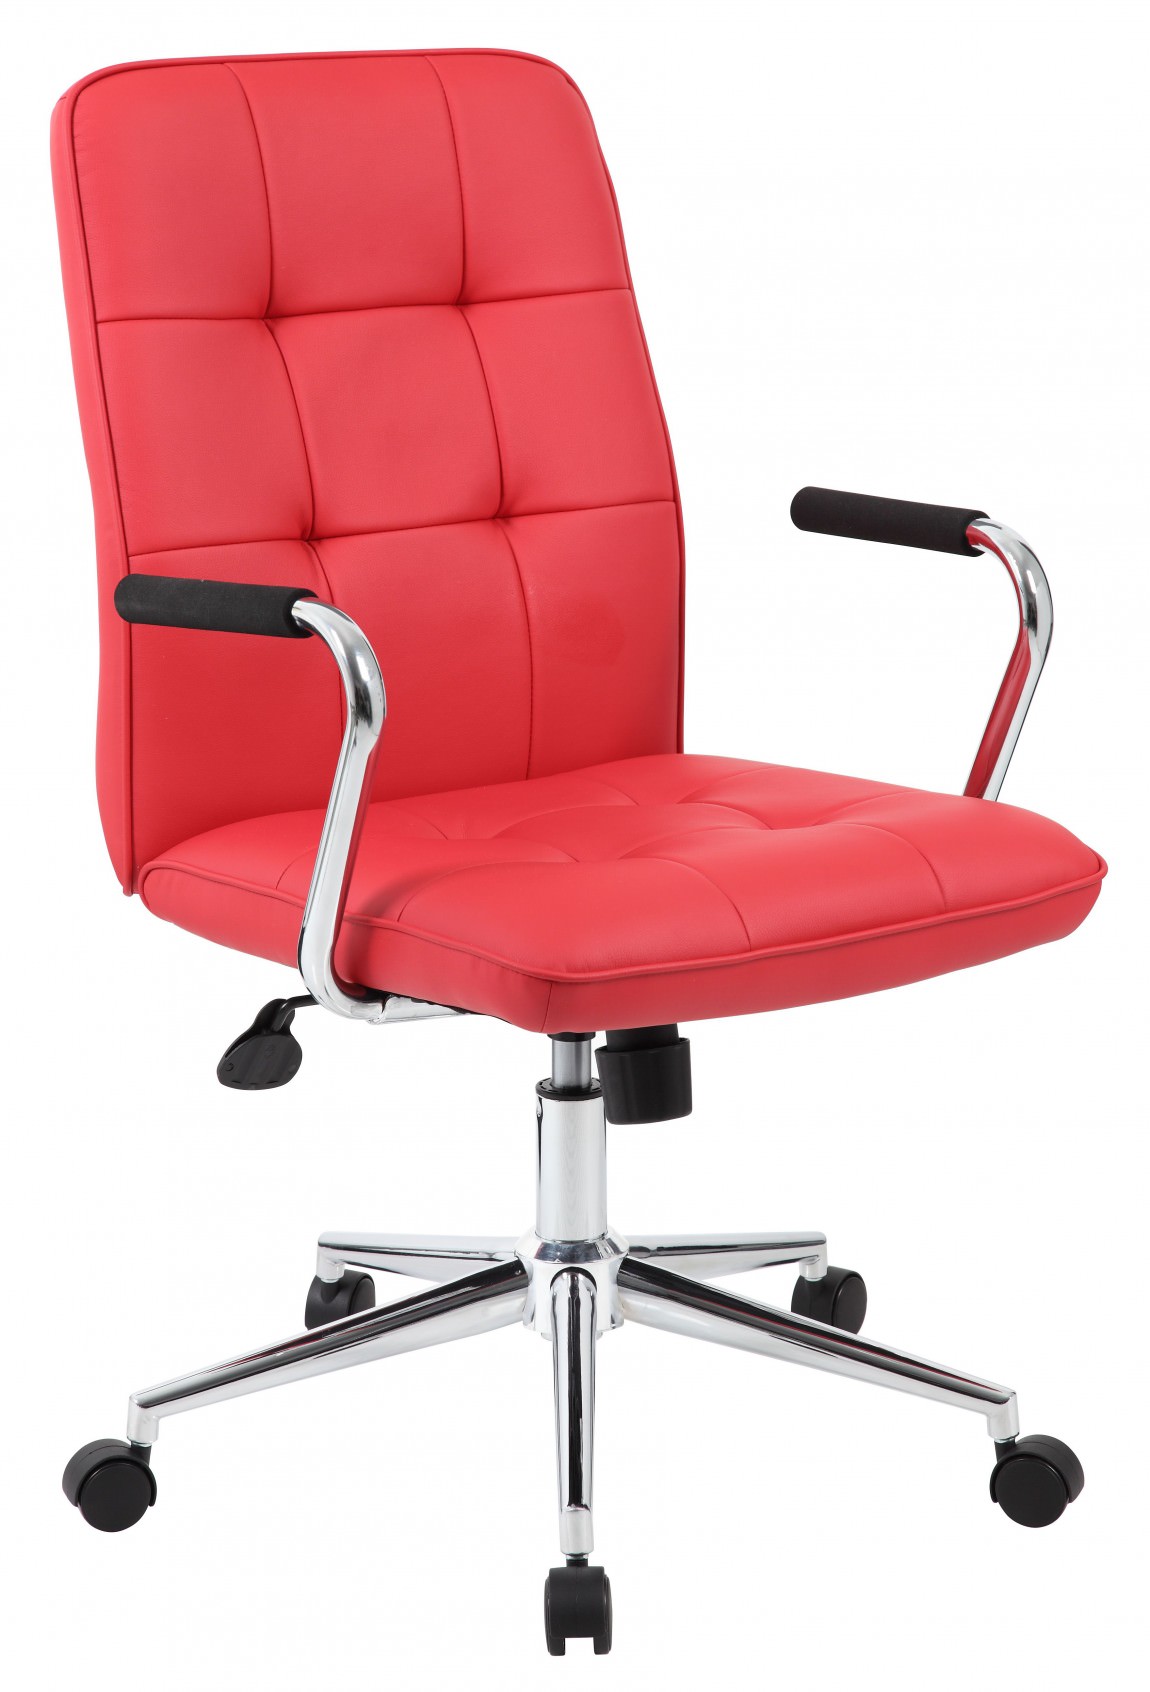 Modern Office Chair with Chrome Arms